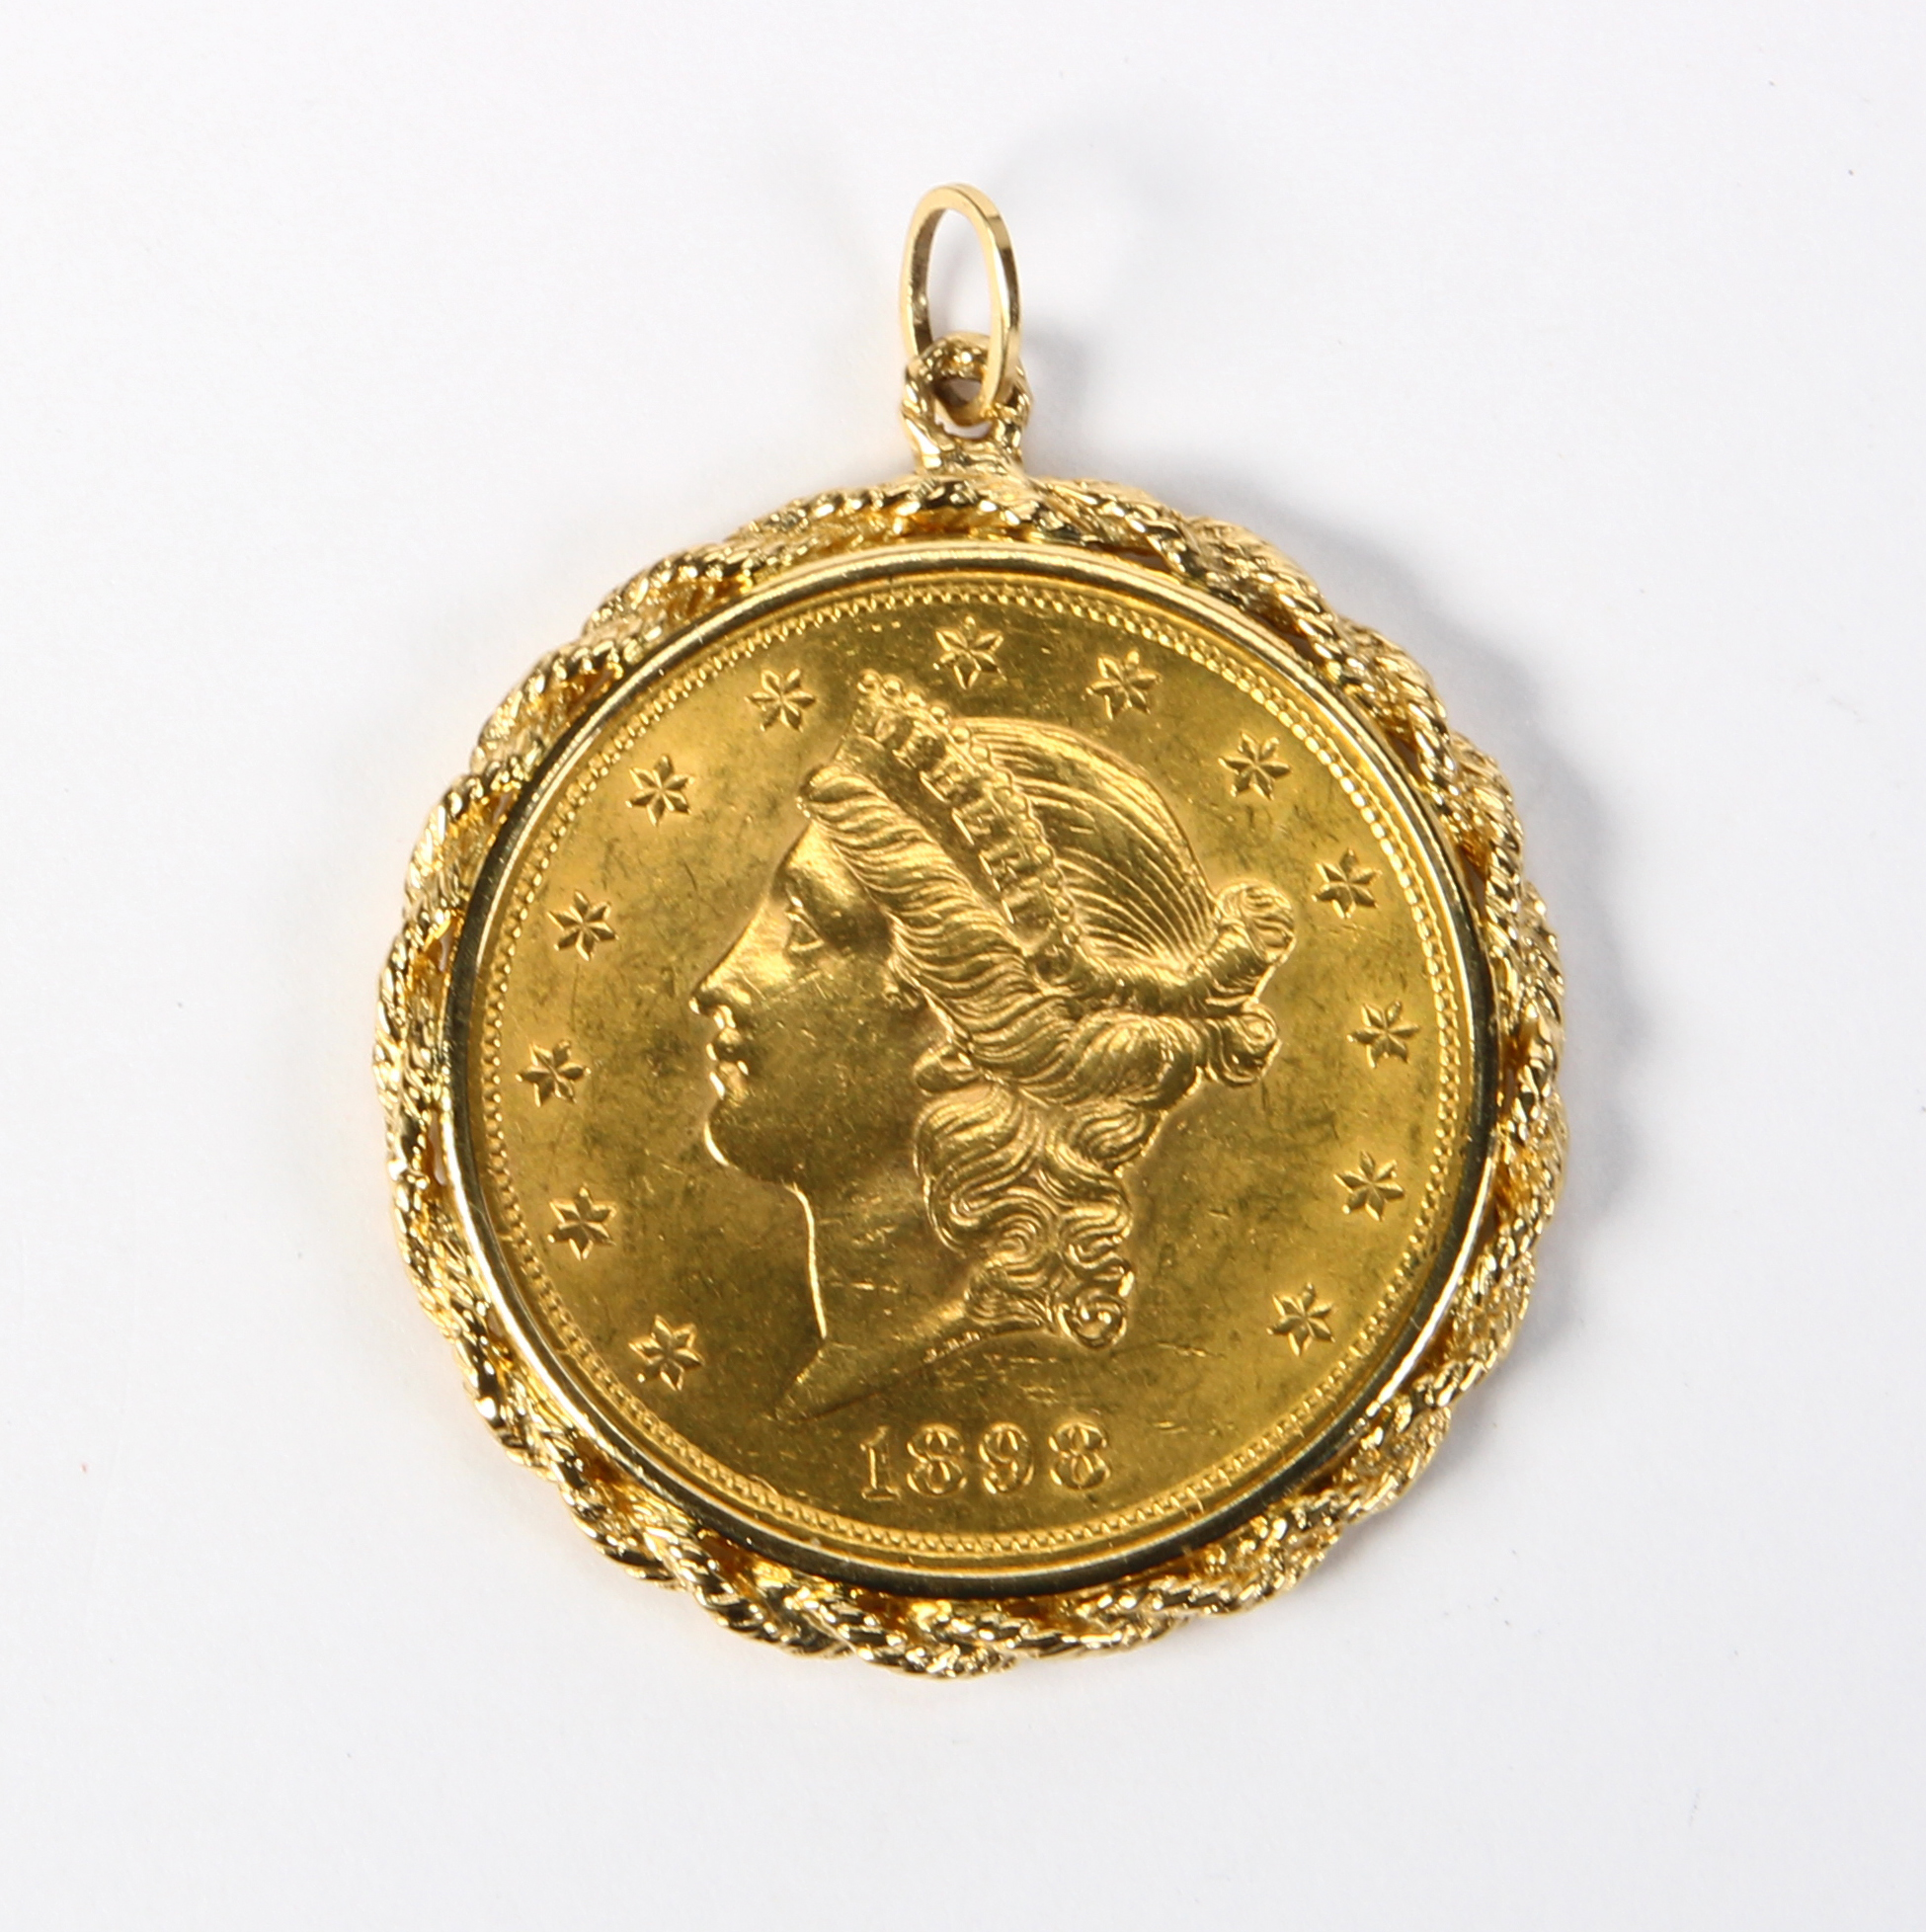 US gold Liberty coin, 14k yellow gold pendant The US, 1898S, $20, gold, Liberty coin, measures